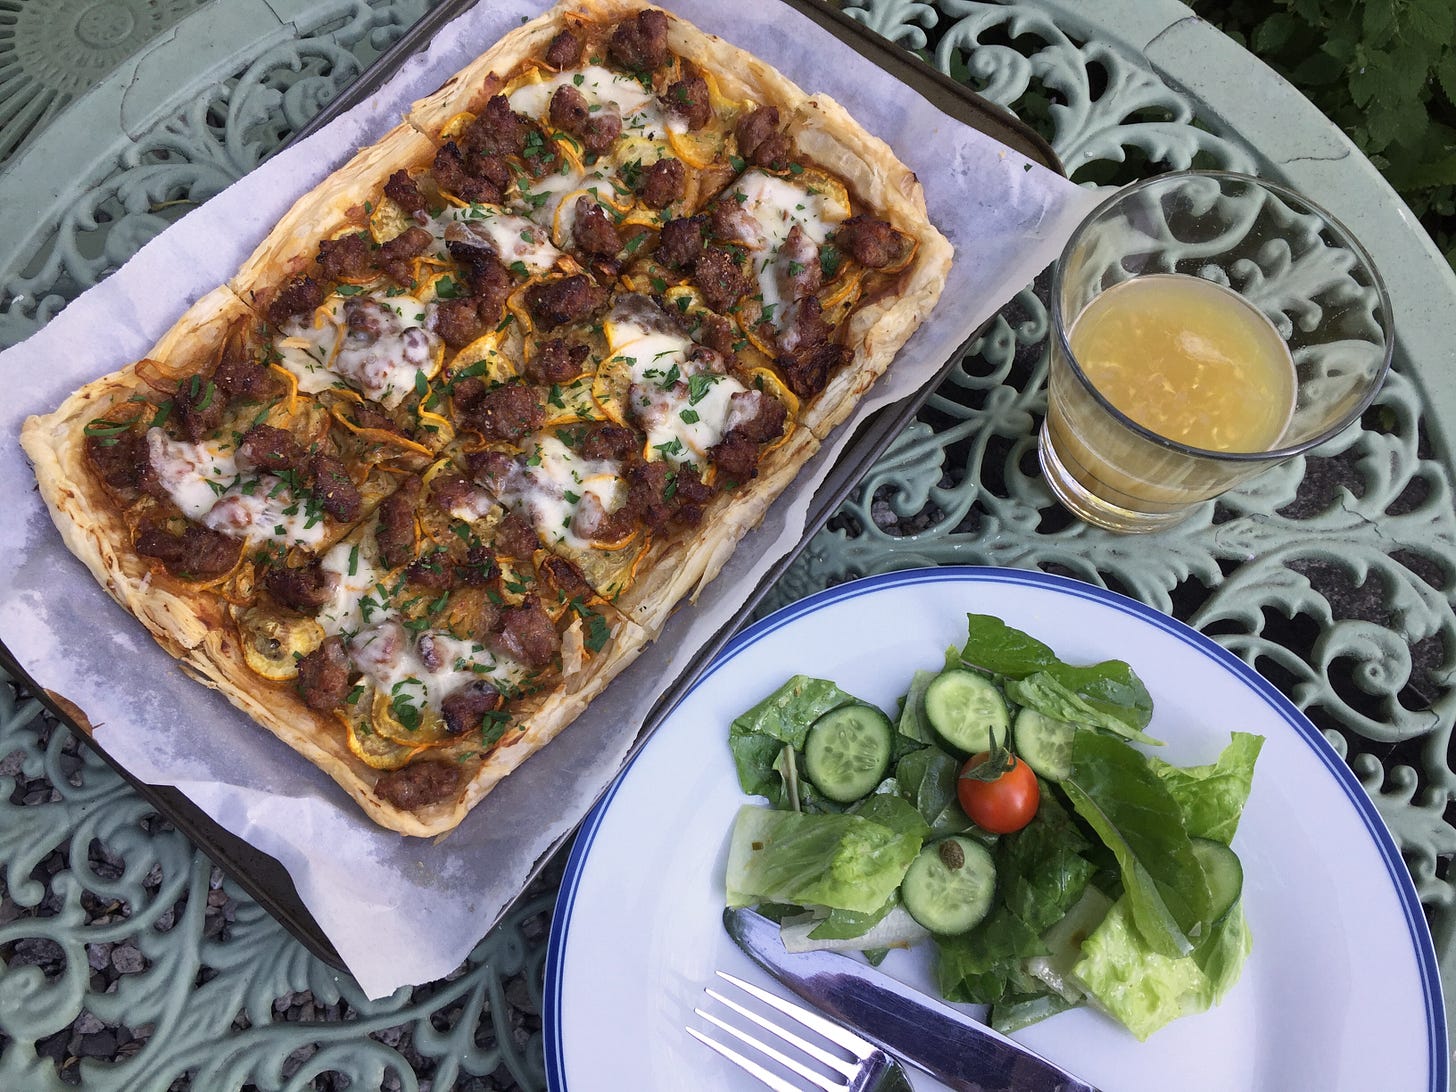 On a green wrought-iron table, a puff pastry tart with sausage, yellow zucchini, herbs, and patches of provolone sits on a parchment-lined baking sheet. To the right is a glass of IPA, and in the bottom corner is a plate with salad next to a knife and fork.